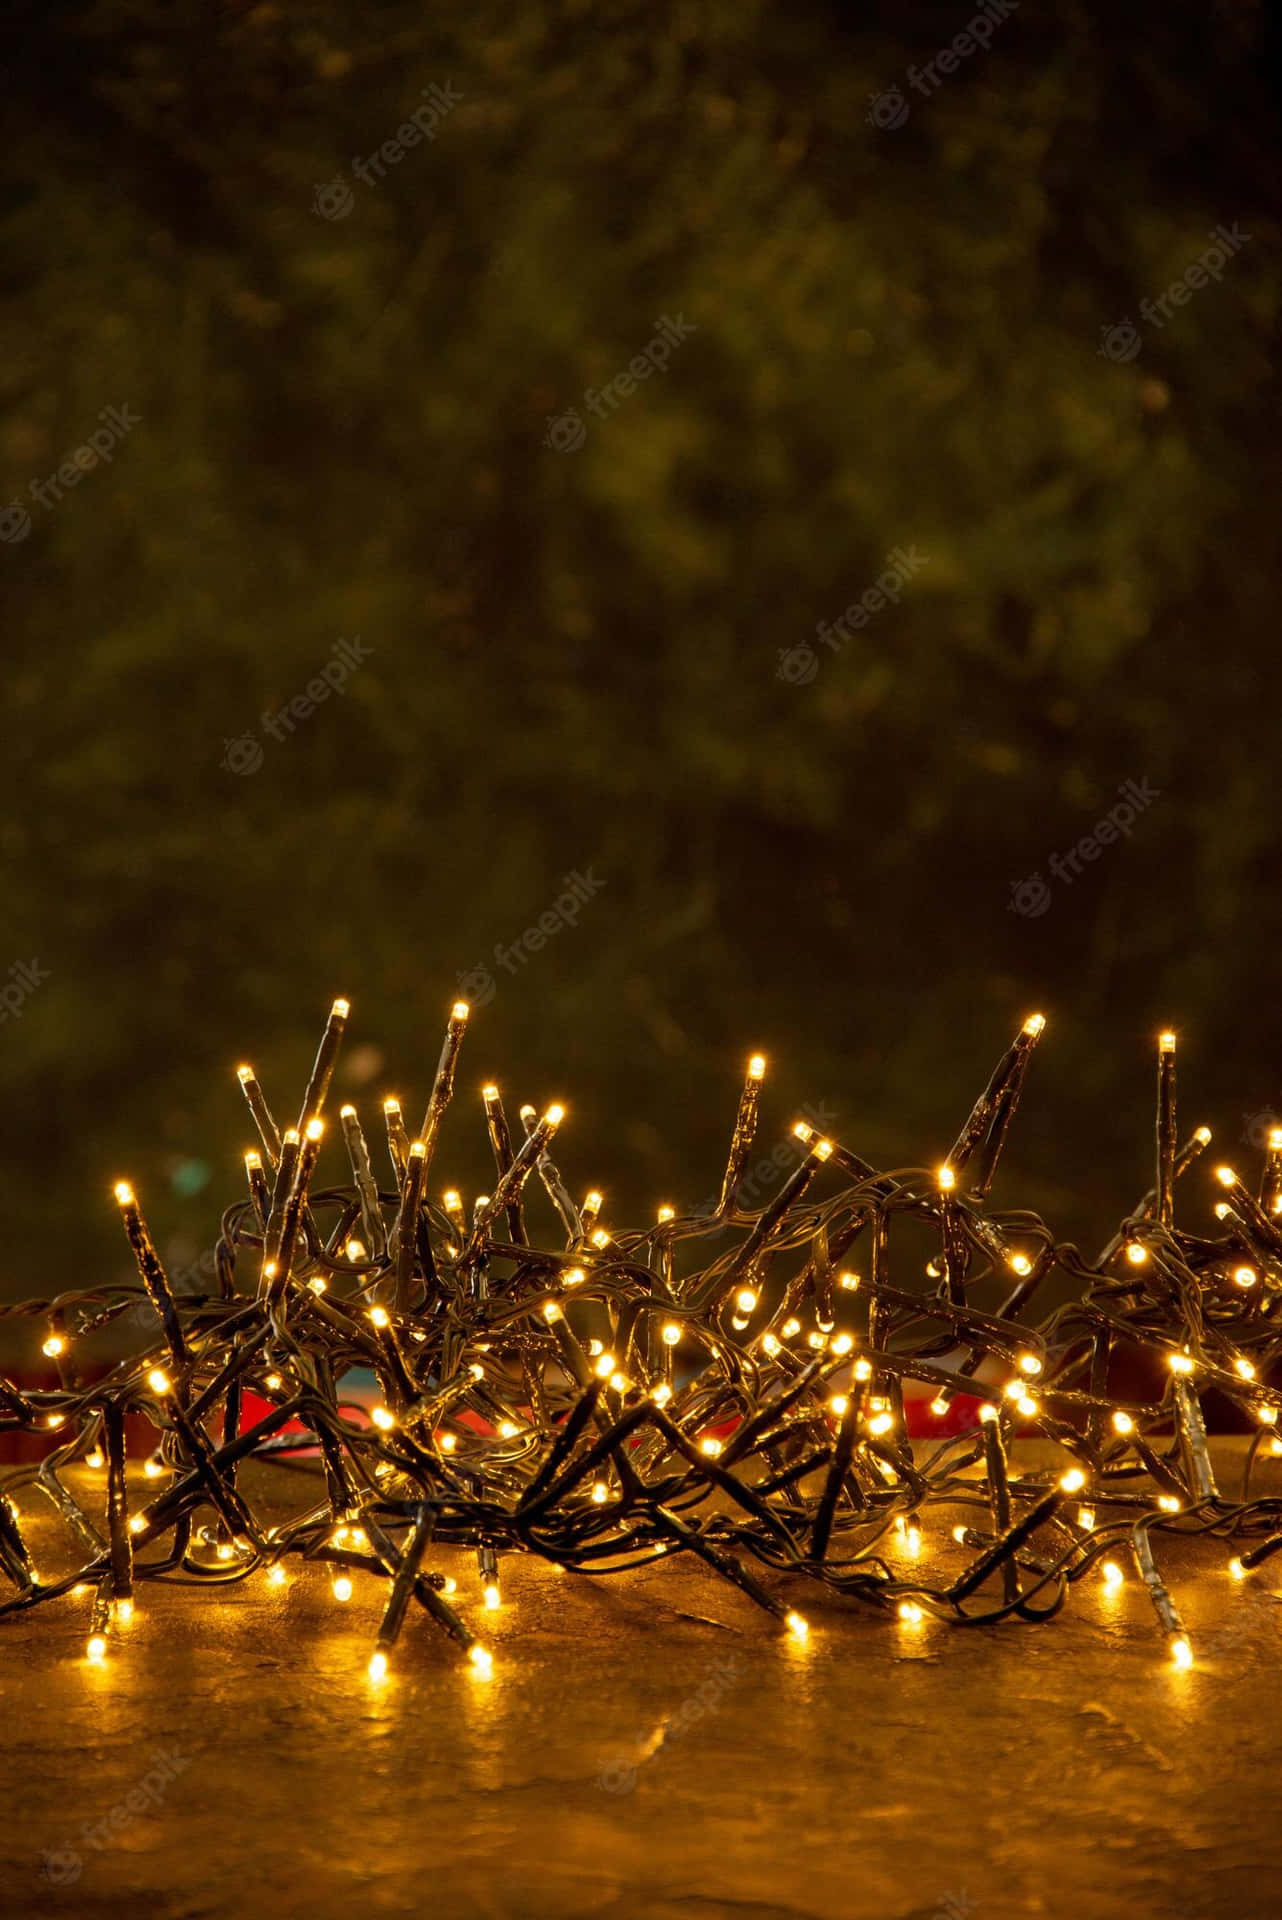 Get Ready for the Holidays with Cute Christmas Lights Wallpaper